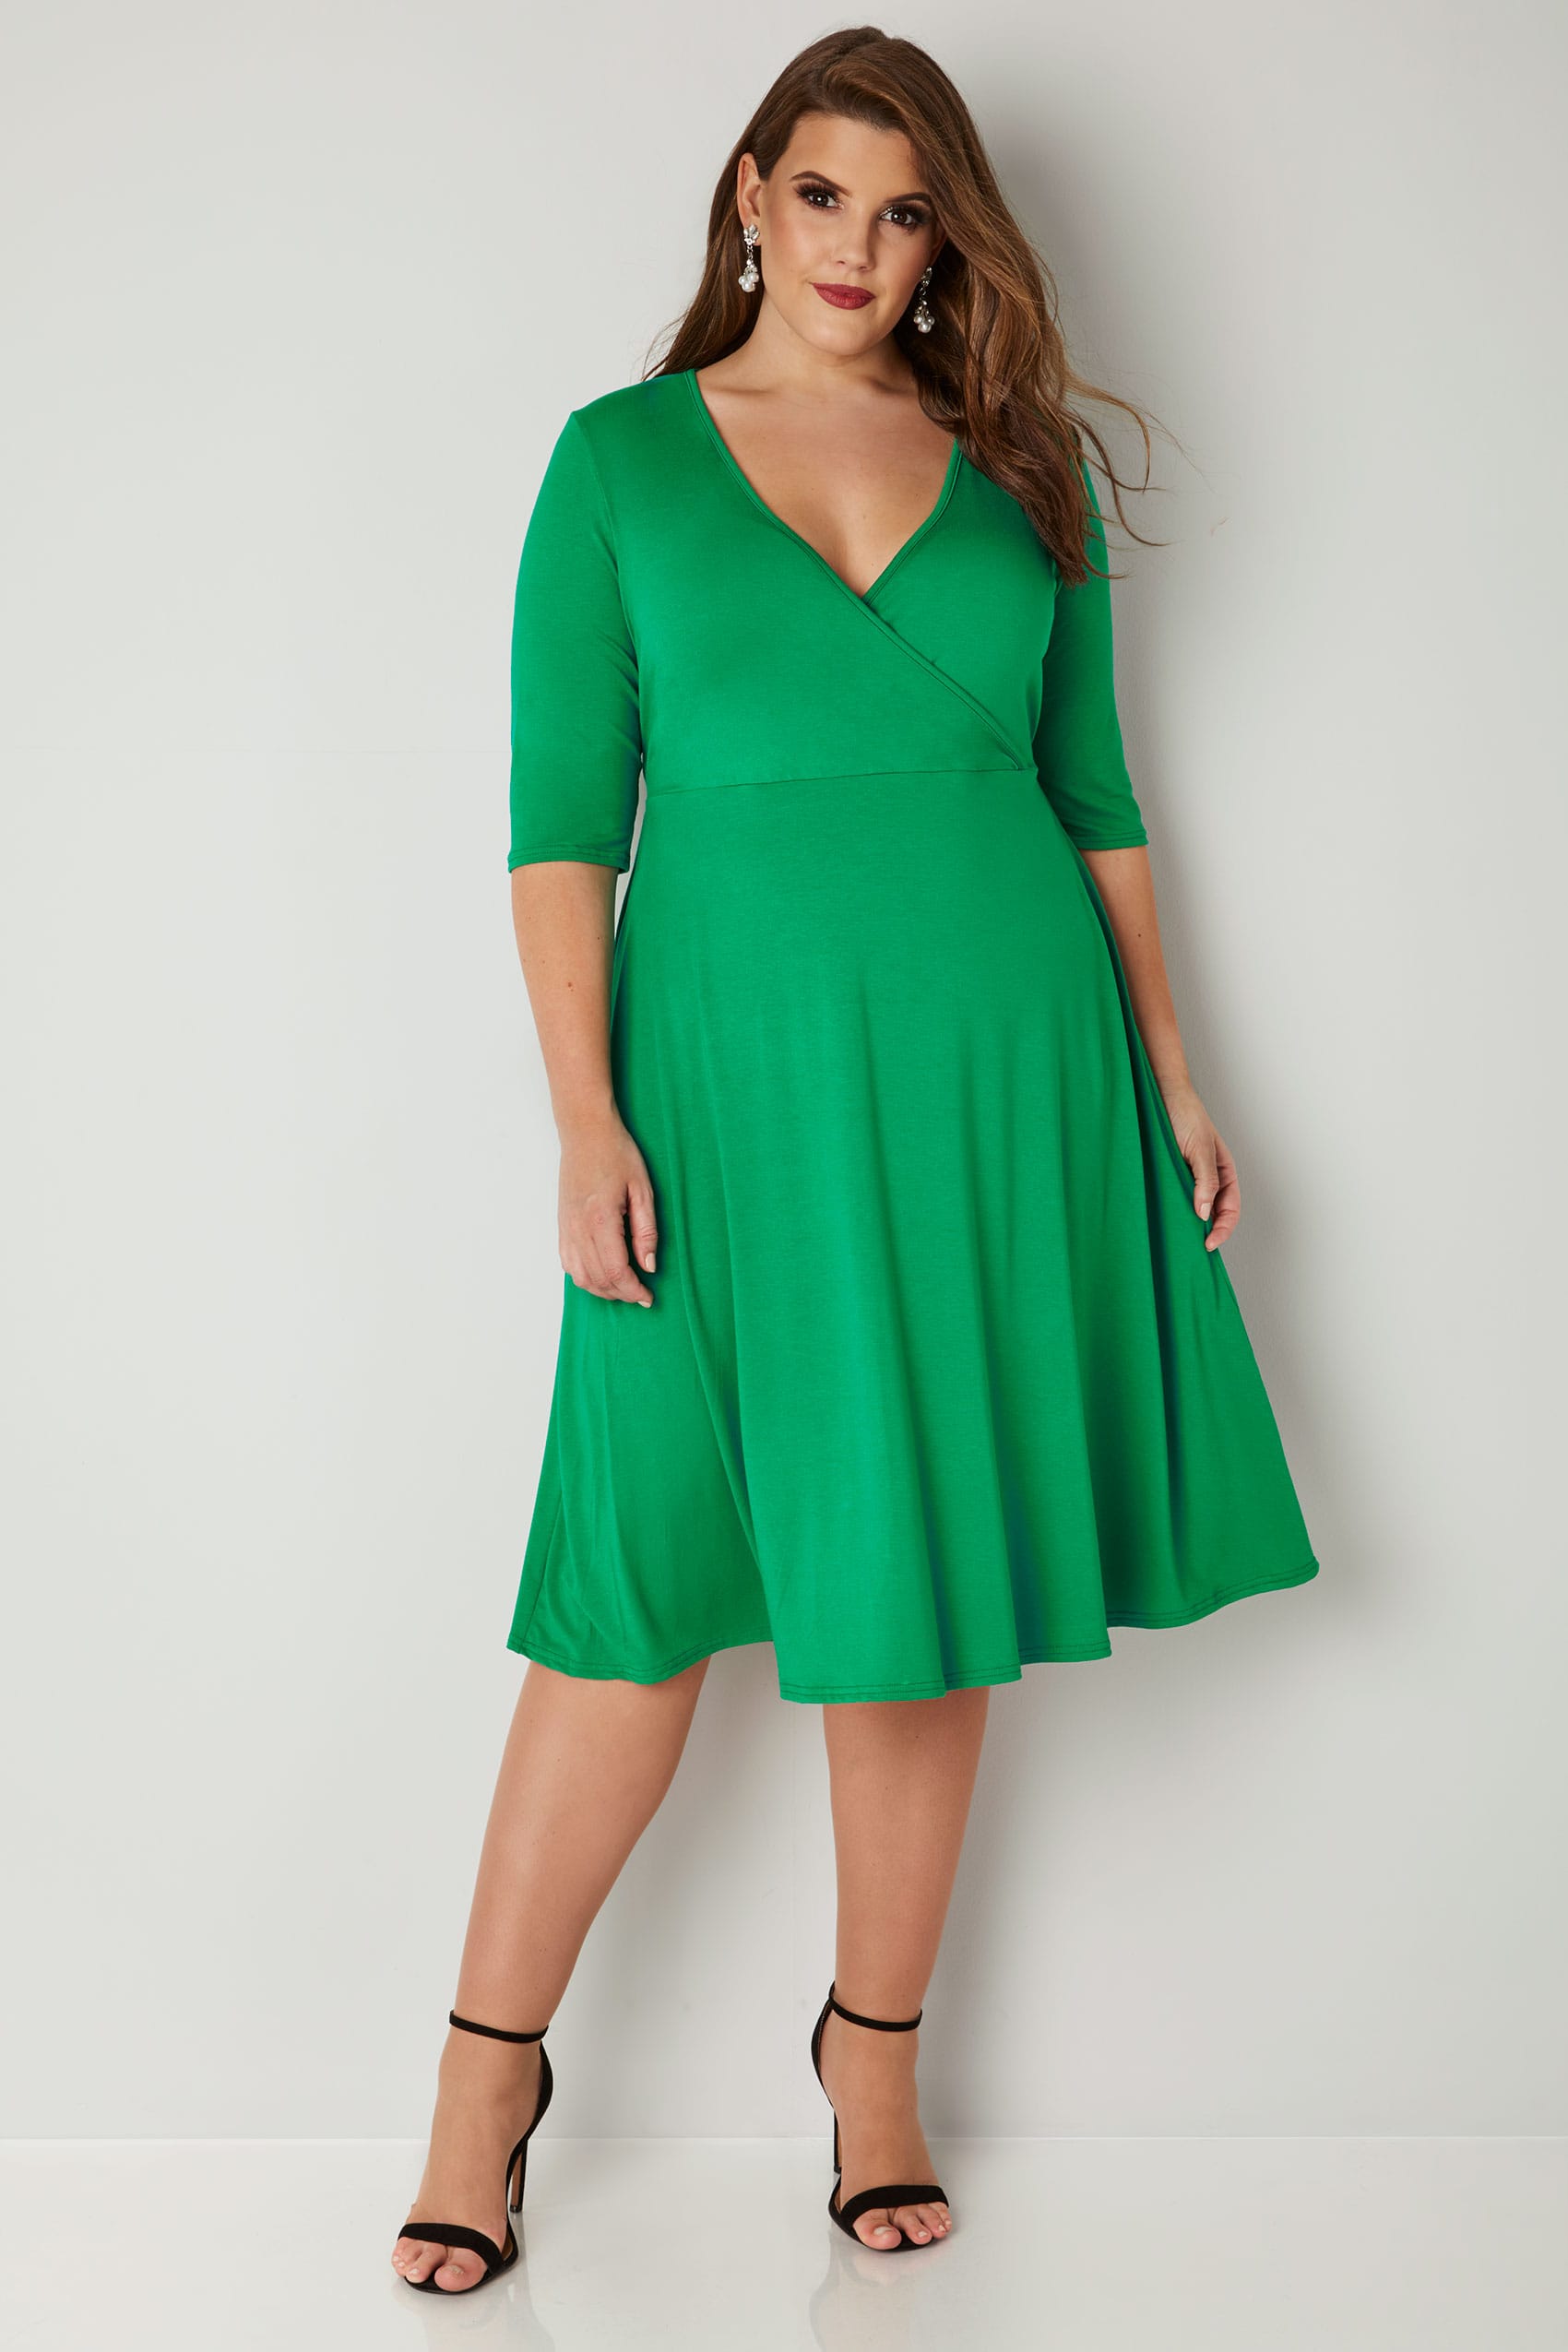 YOURS LONDON Green Wrap Dress, Plus size 16 to 36